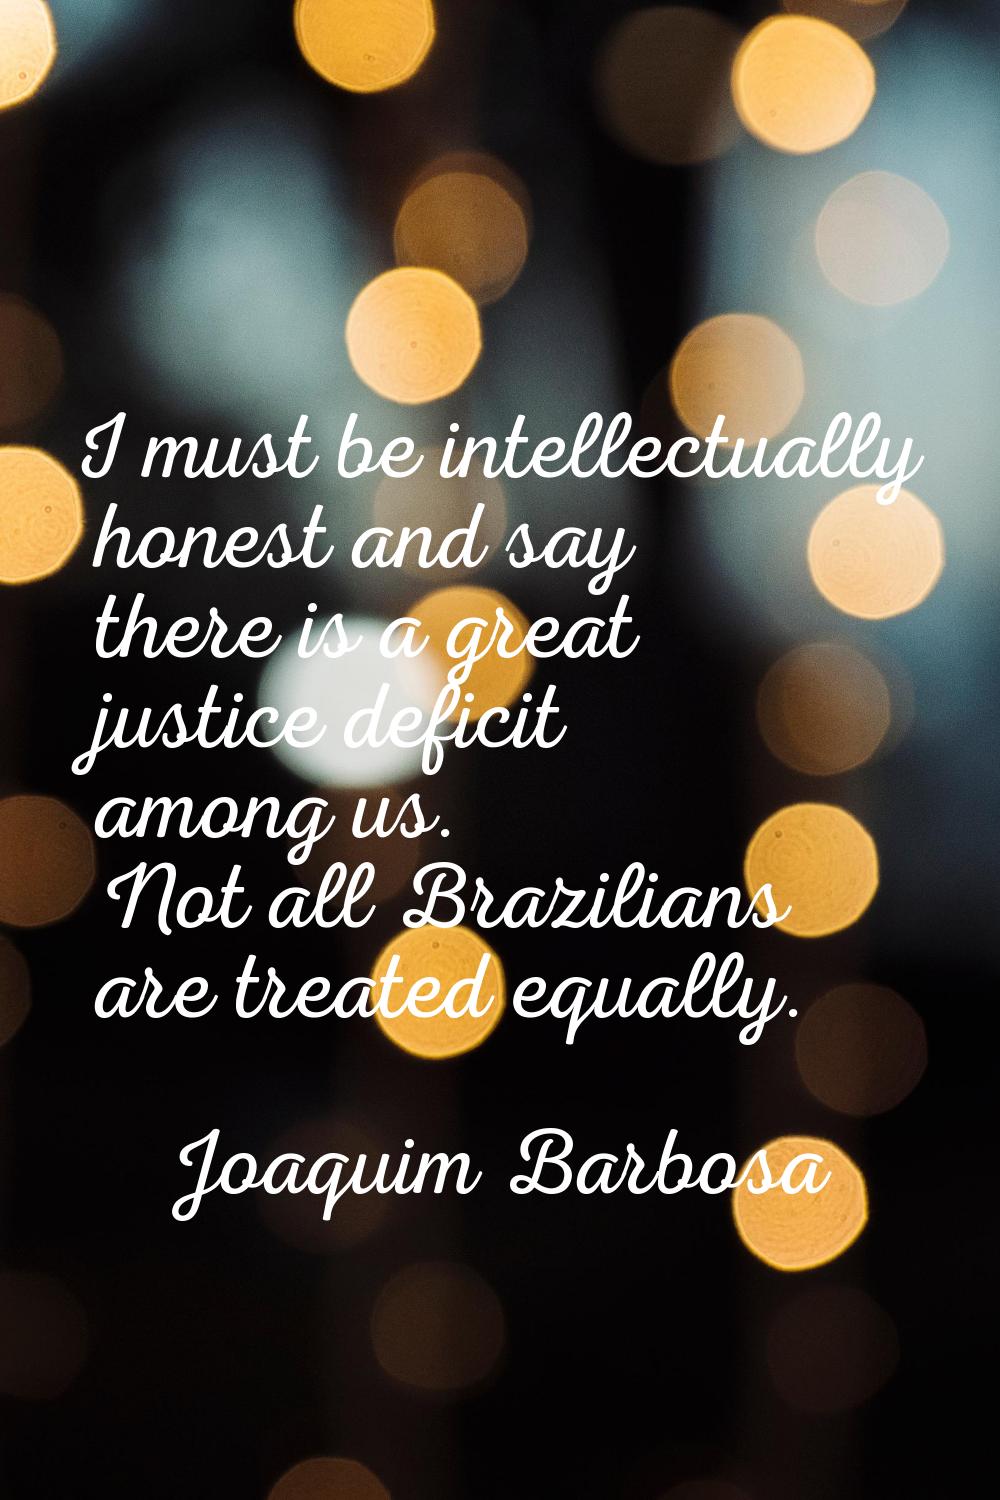 I must be intellectually honest and say there is a great justice deficit among us. Not all Brazilia